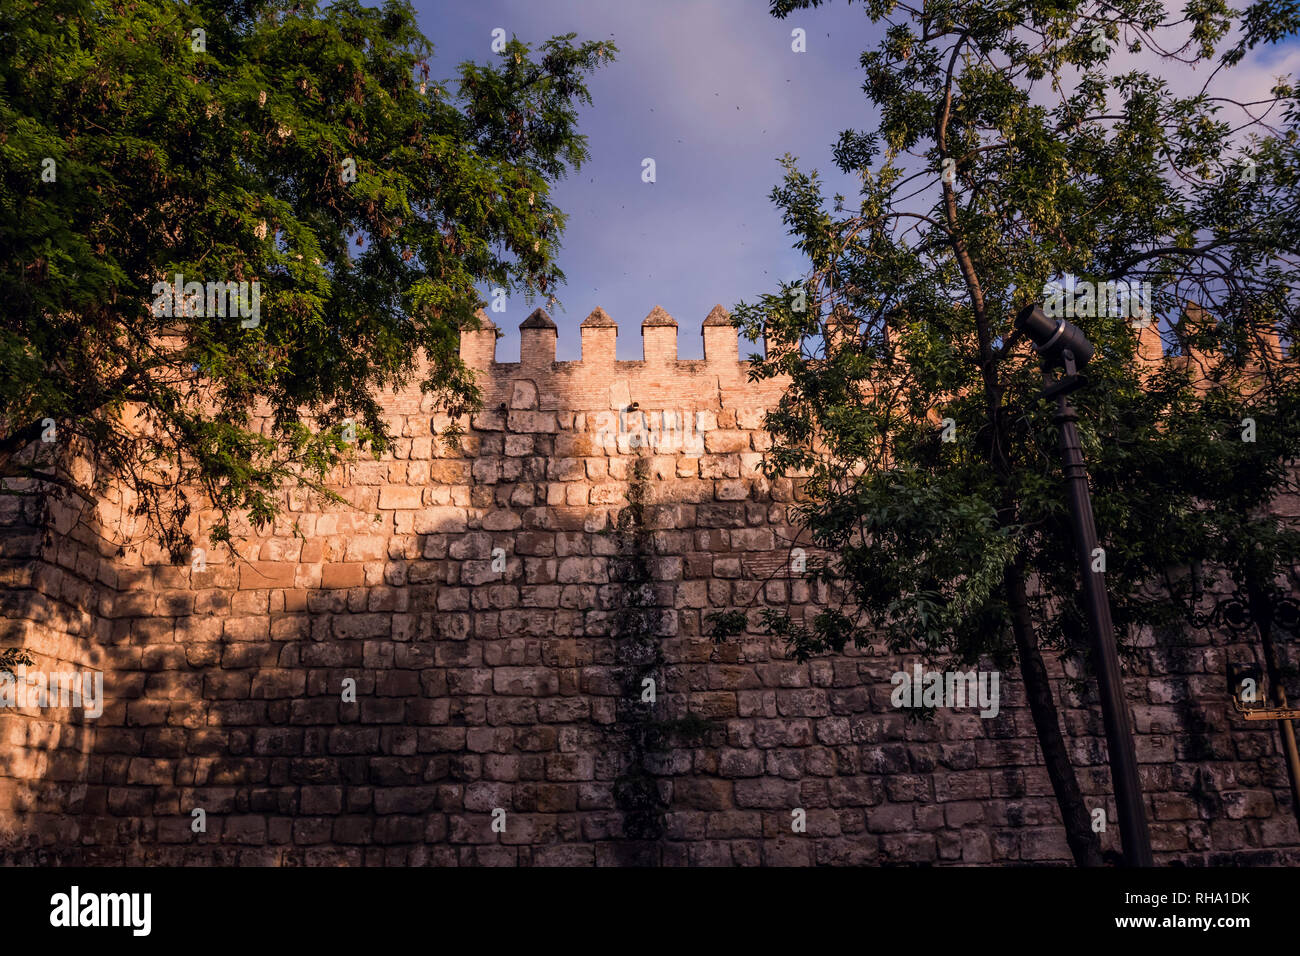 Battlement and sandstone wall with trees in the foreground and sky background Stock Photo